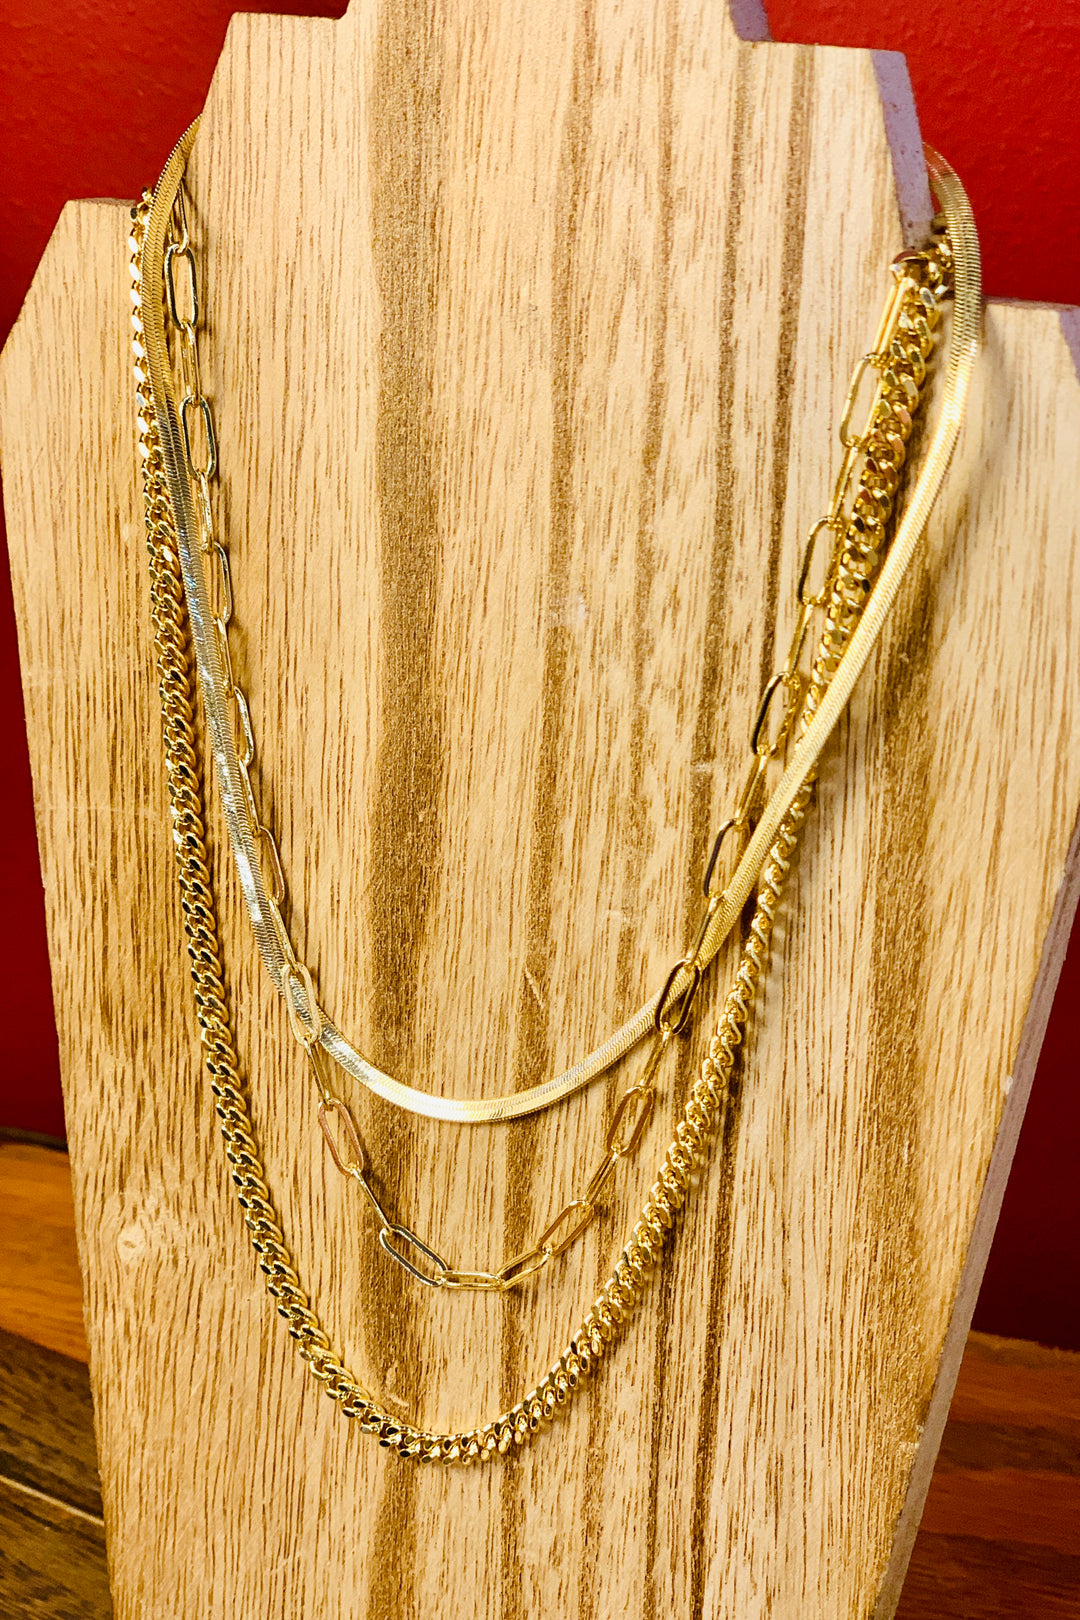 Triple Layer Necklace